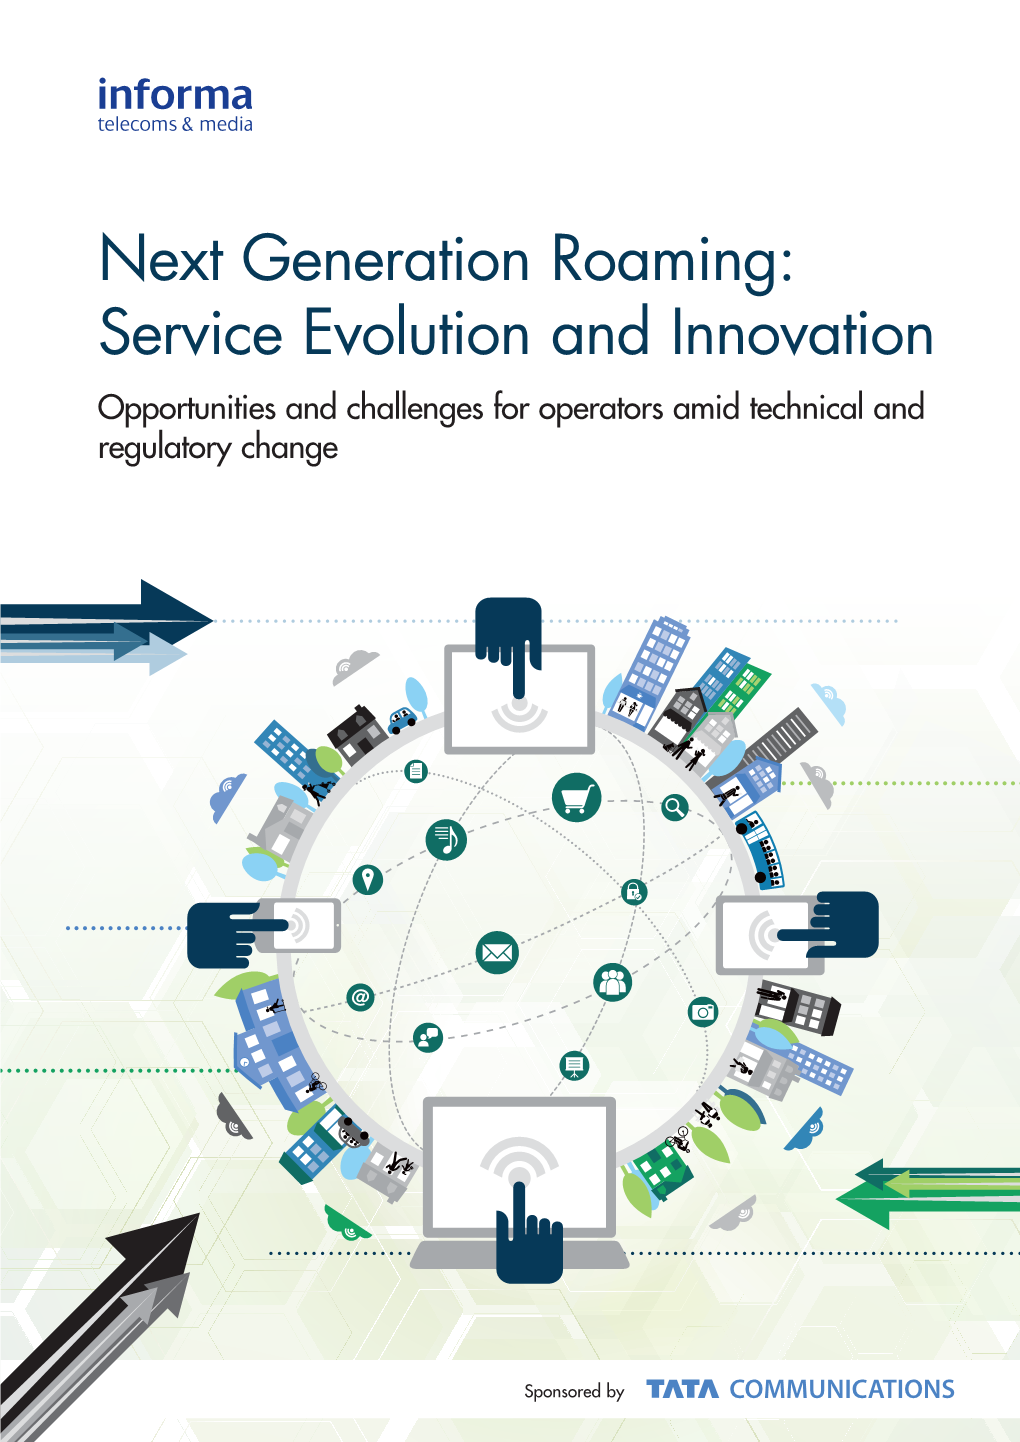 Next Generation Roaming: Service Evolution and Innovation Opportunities and Challenges for Operators Amid Technical and Regulatory Change